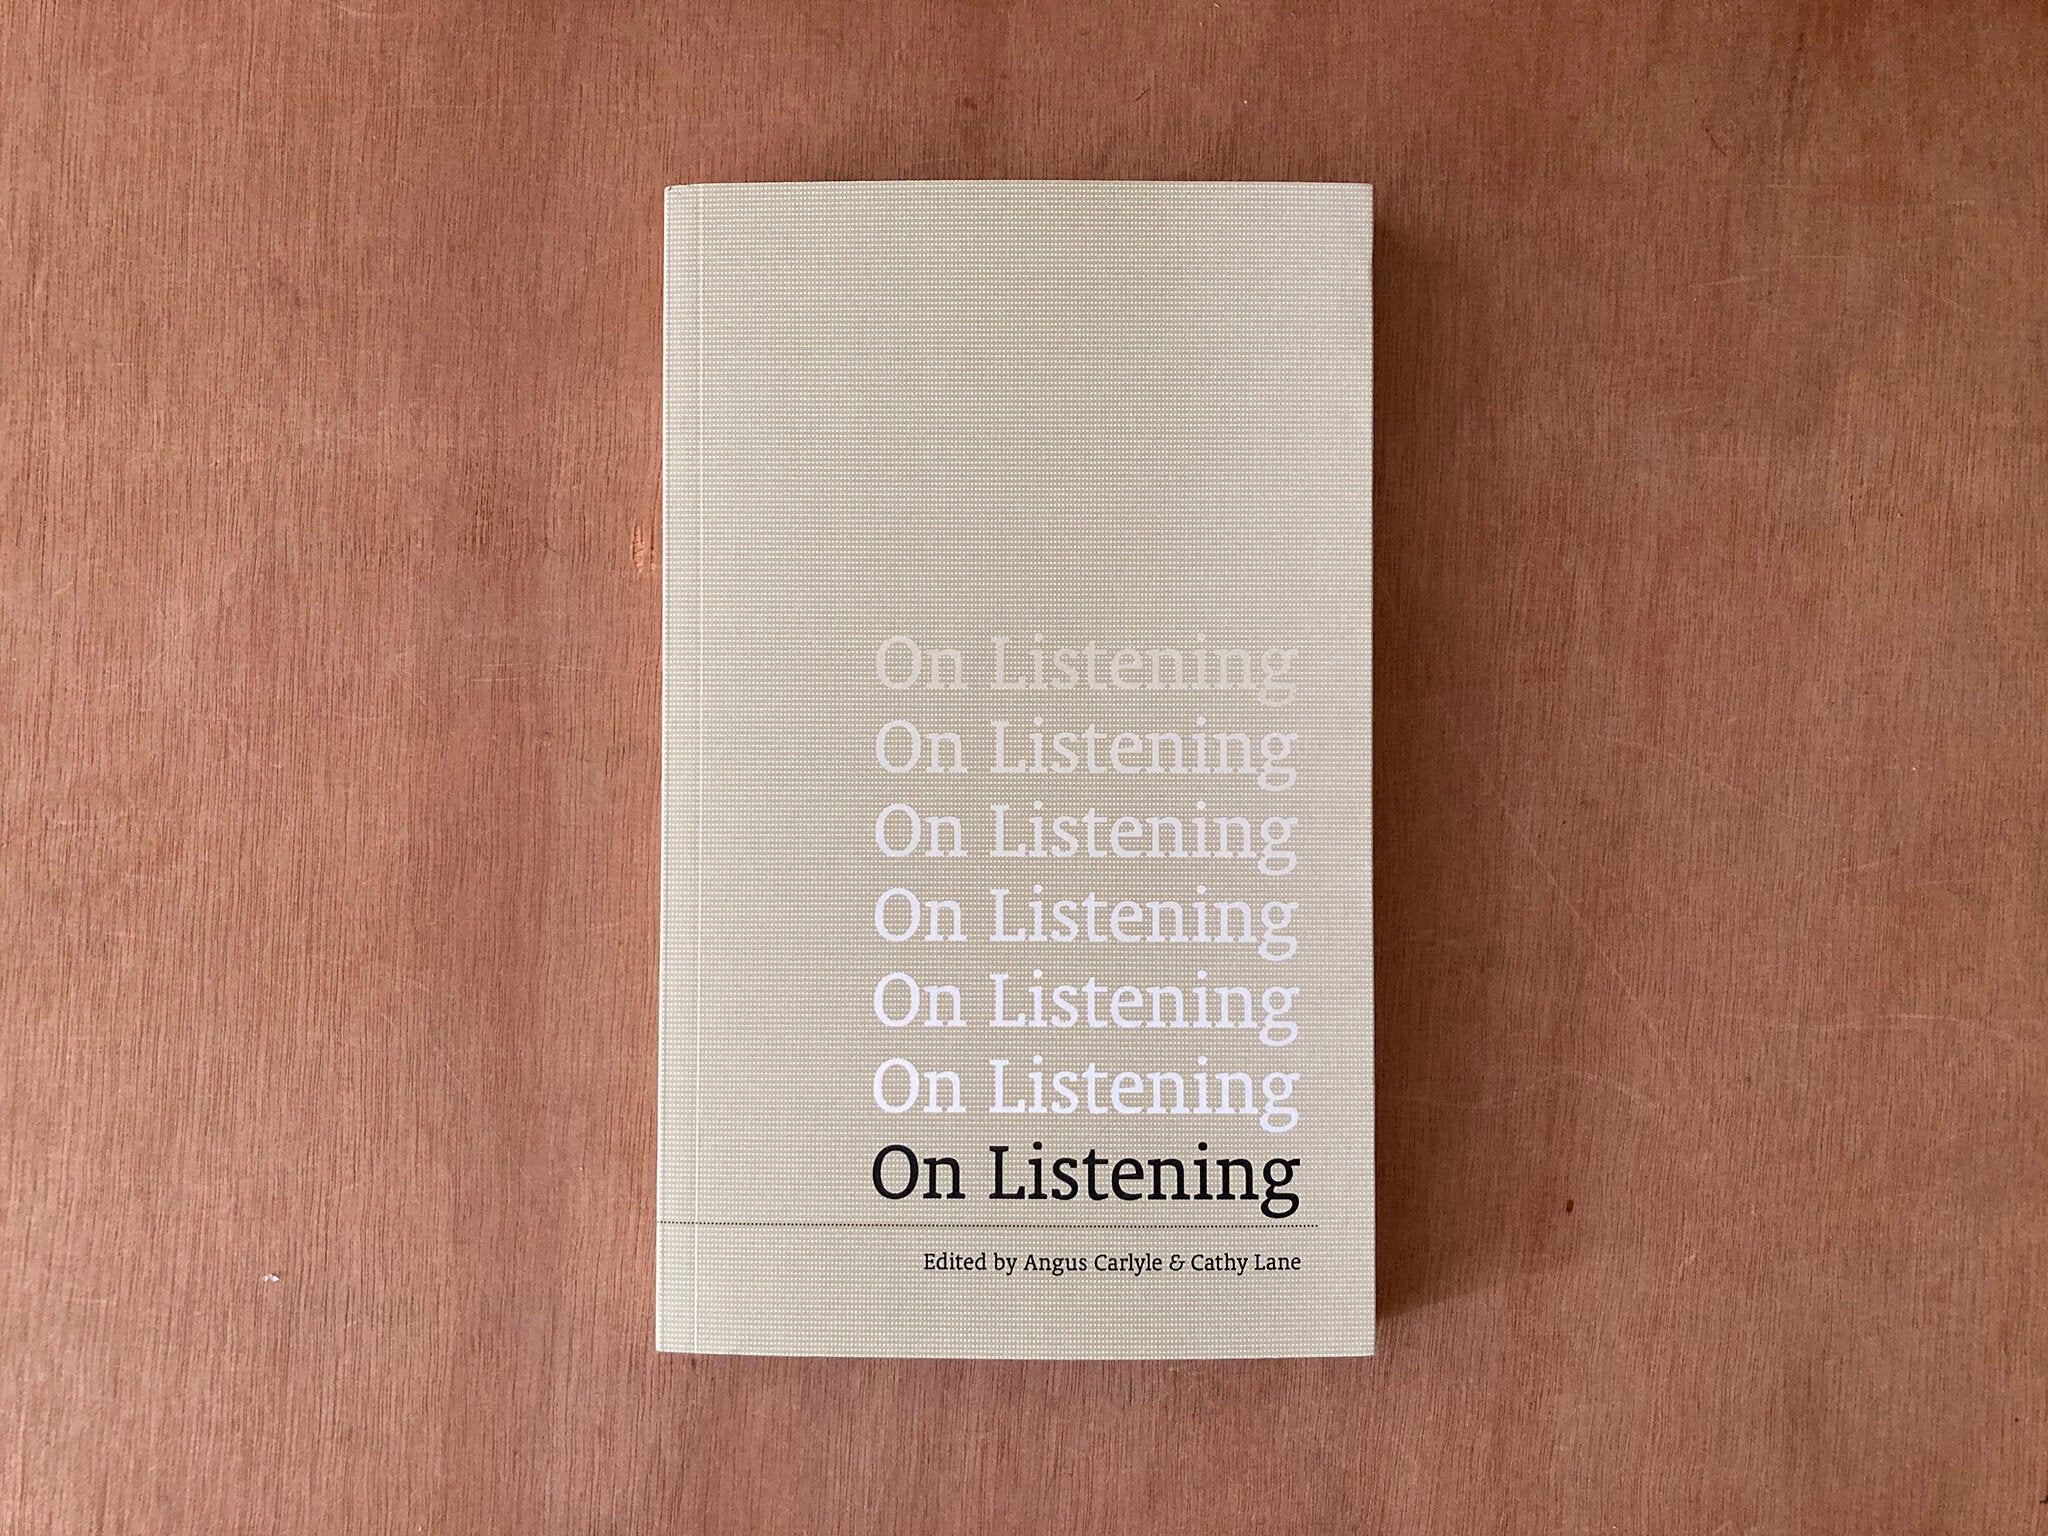 ON LISTENING edited by Angus Carlyle and Cathy Lane